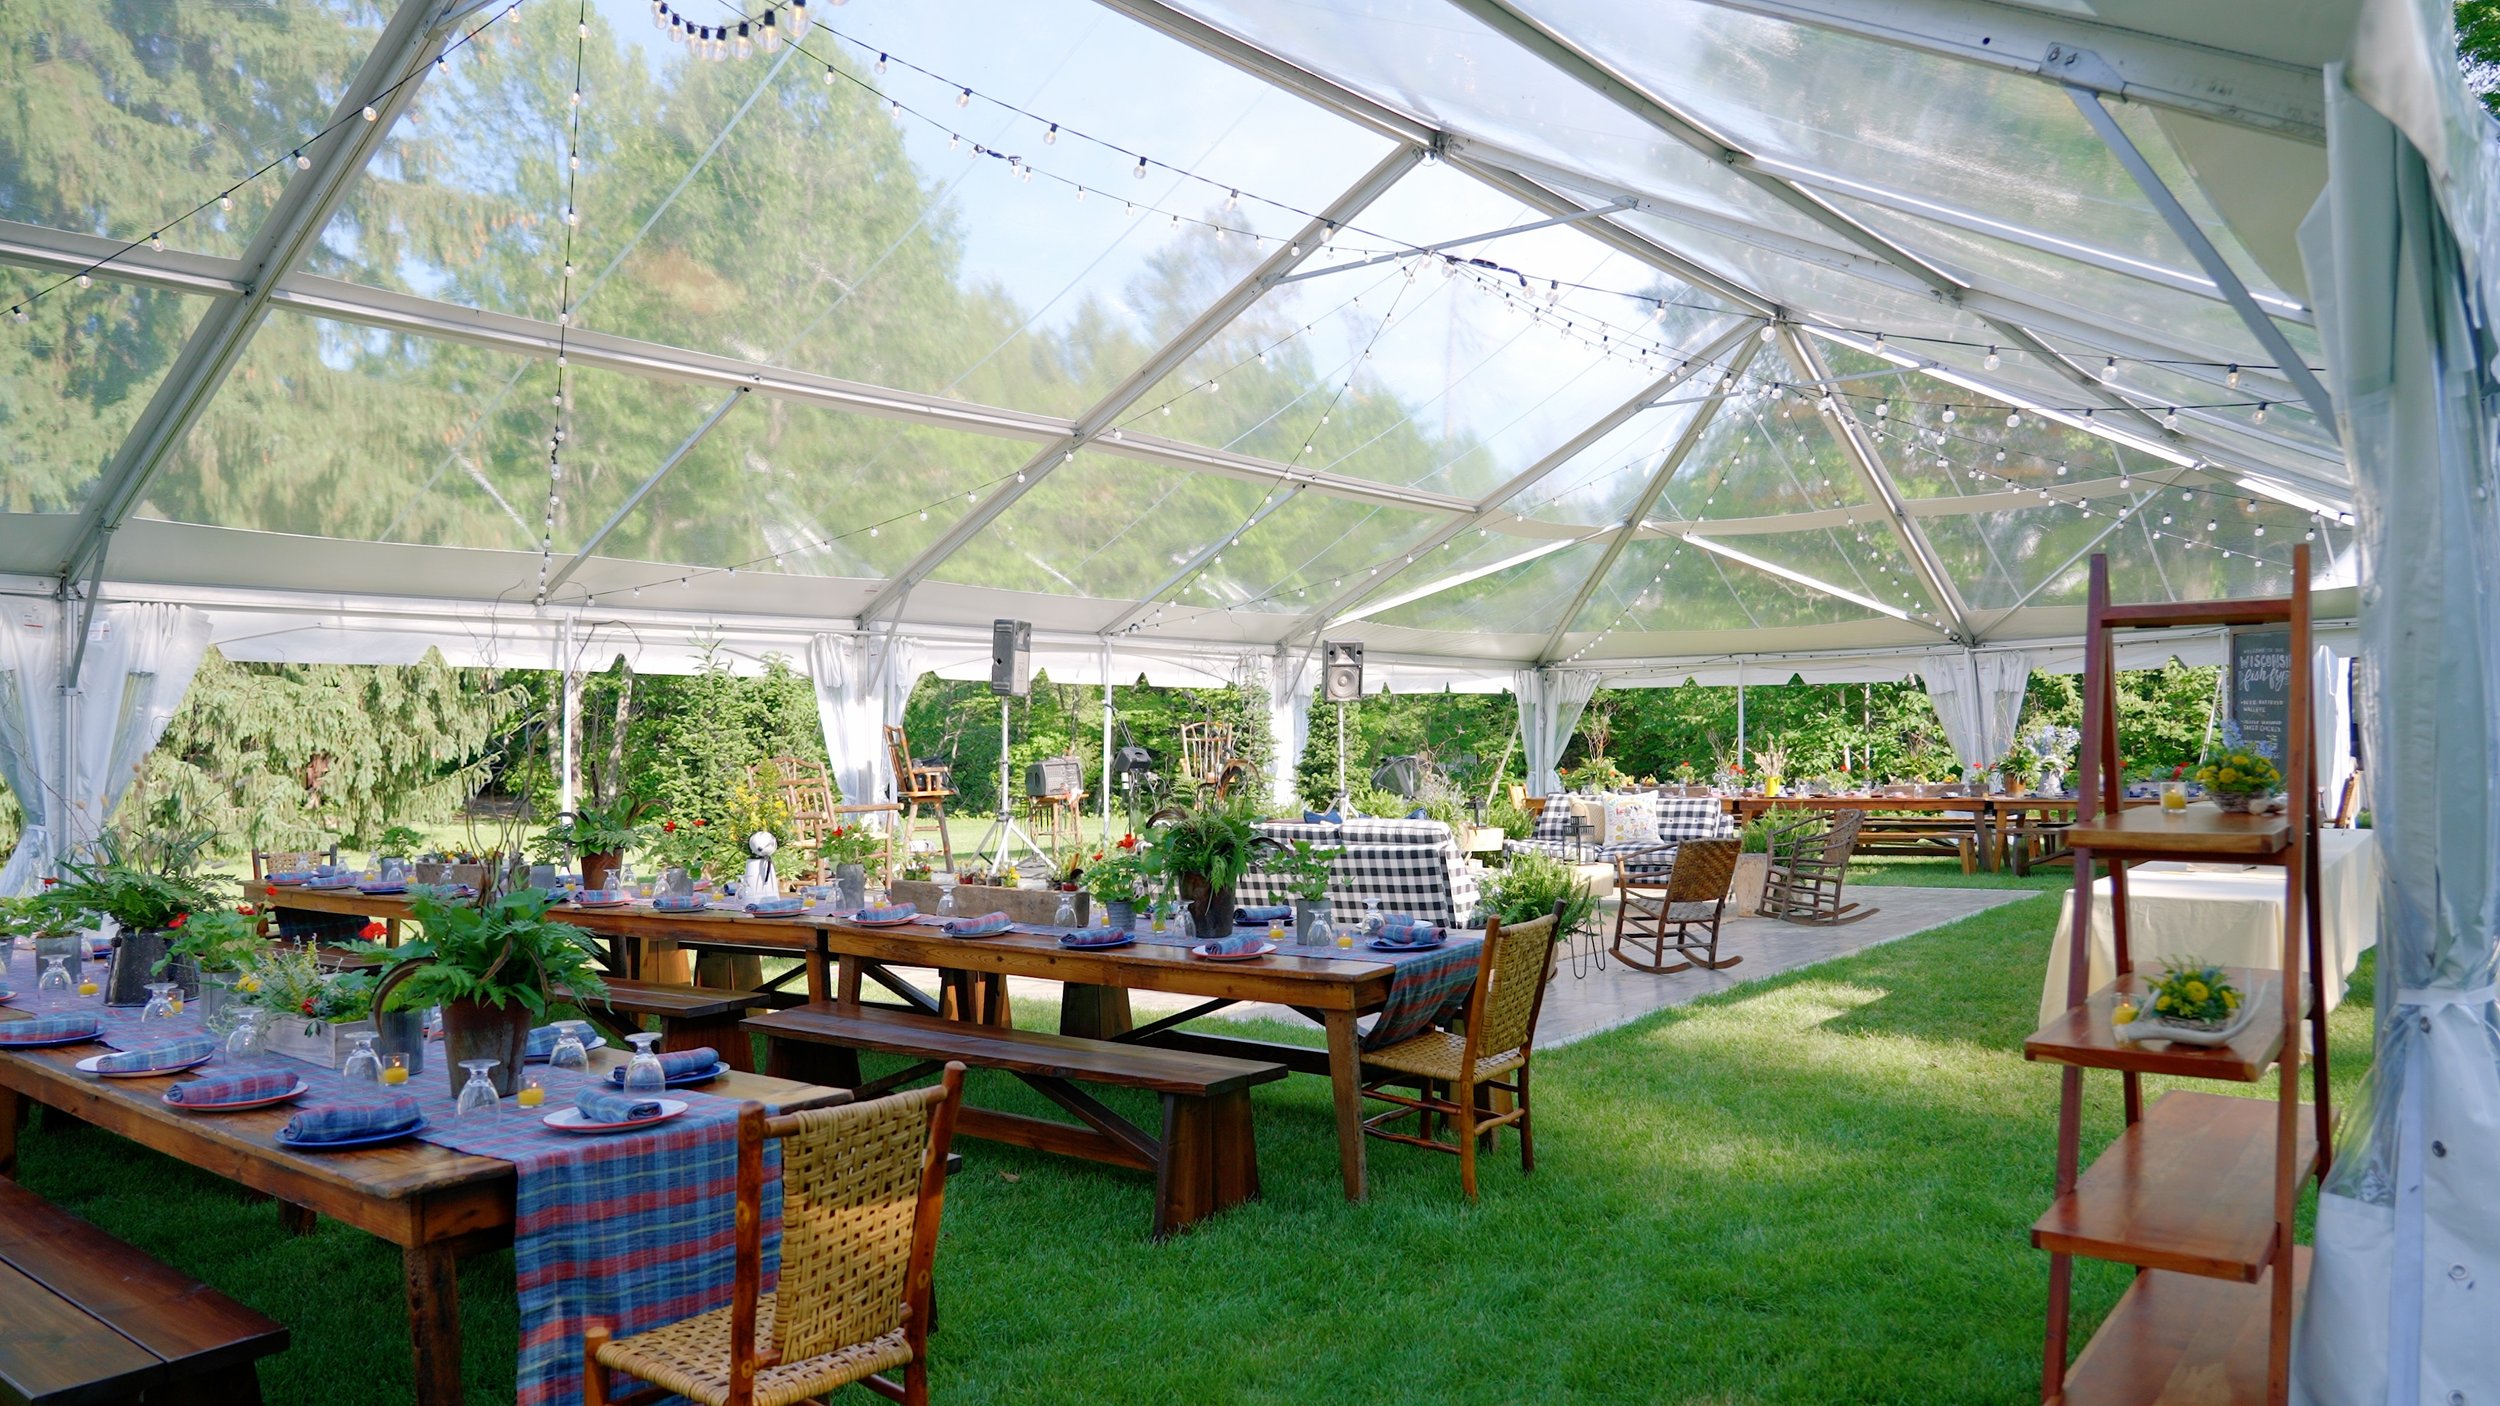 outdoor rehearsal dinner venue under a glass tent